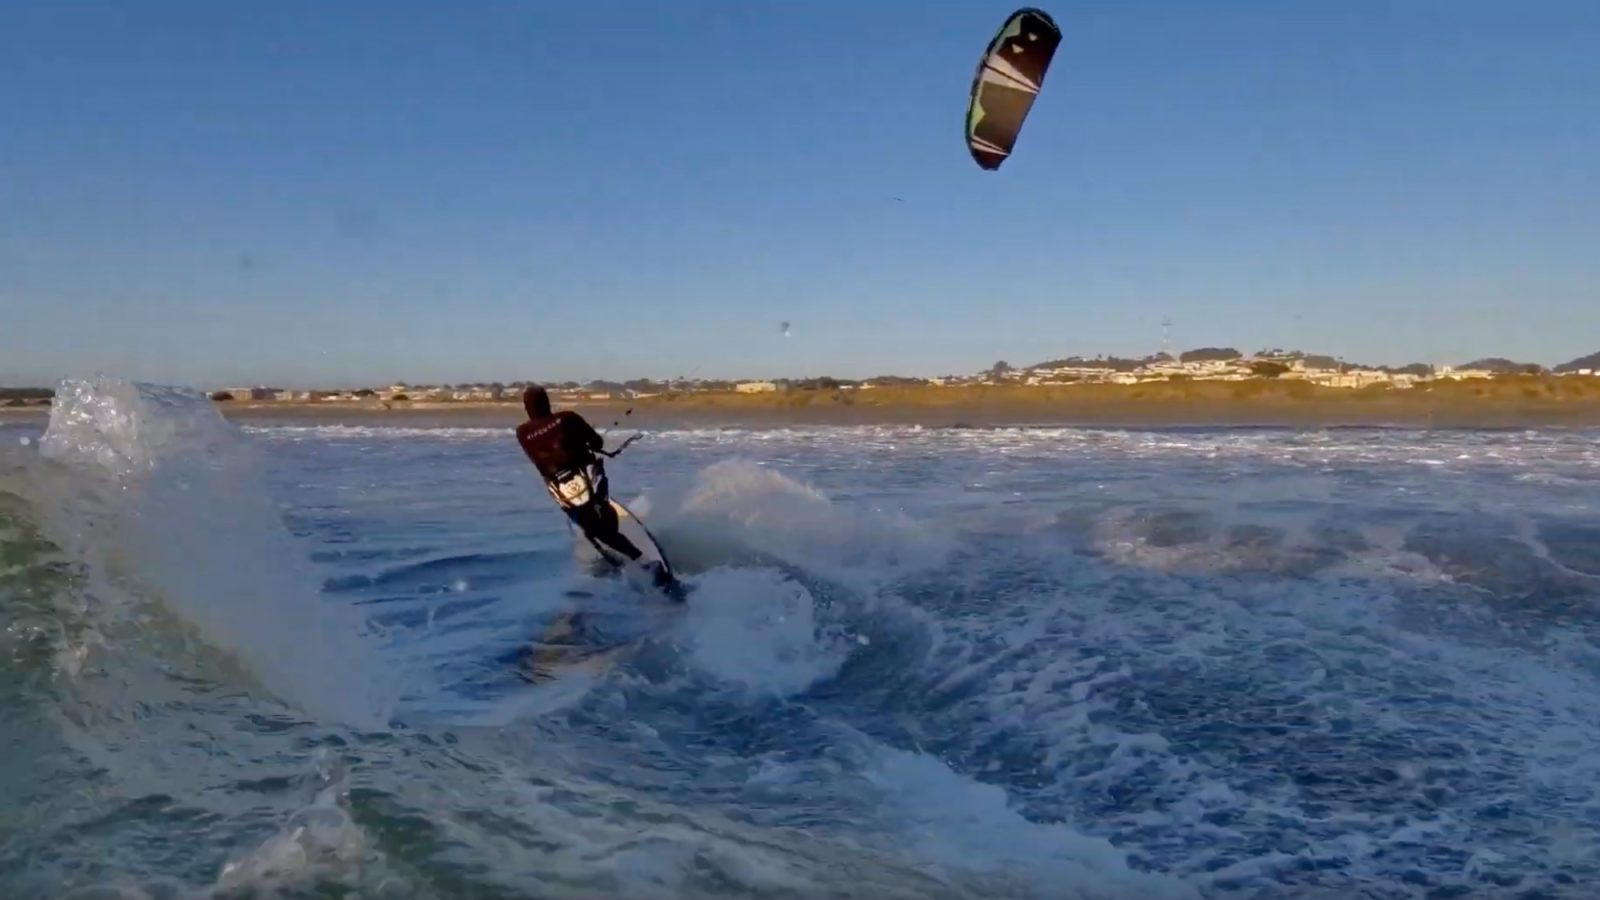 Kiteboarder-almost-loses-new-Skydio-2-drone.jpg